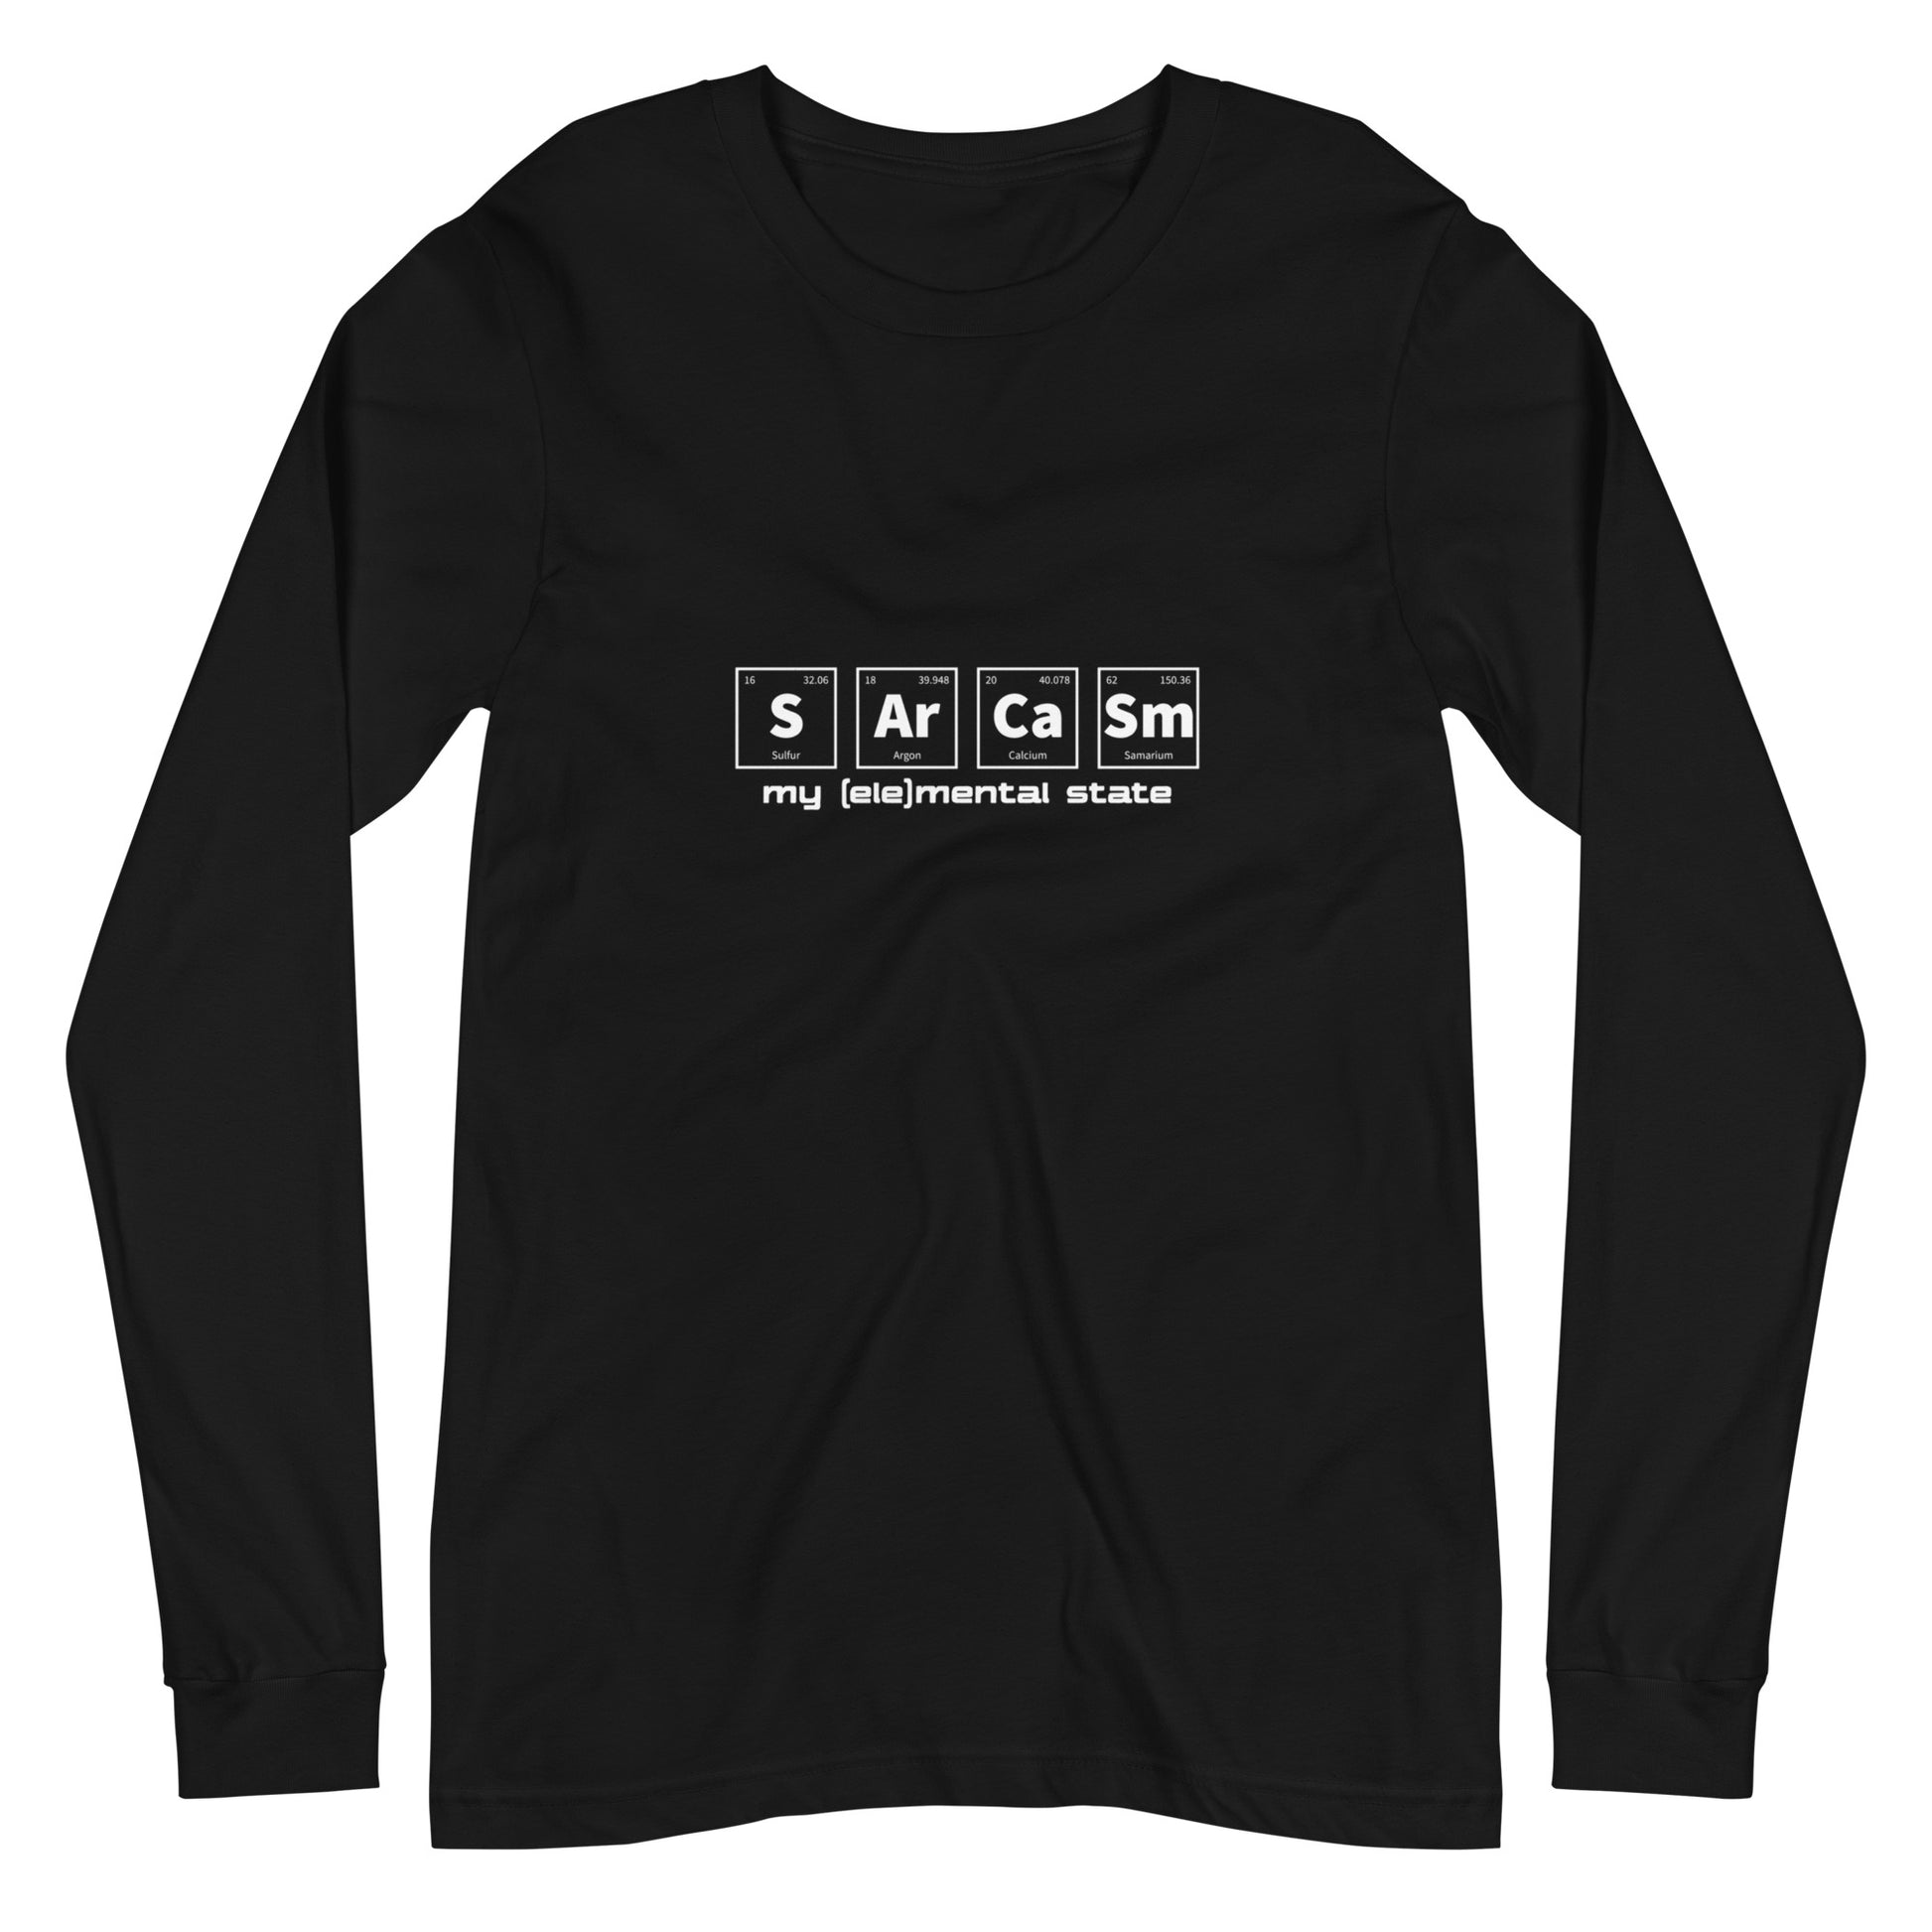 Black long sleeve t-shirt with graphic of periodic table of elements symbols for Sulfur (S), Argon (Ar), Calcium (Ca), and Samarium (Sm) and text "my (ele)mental state"